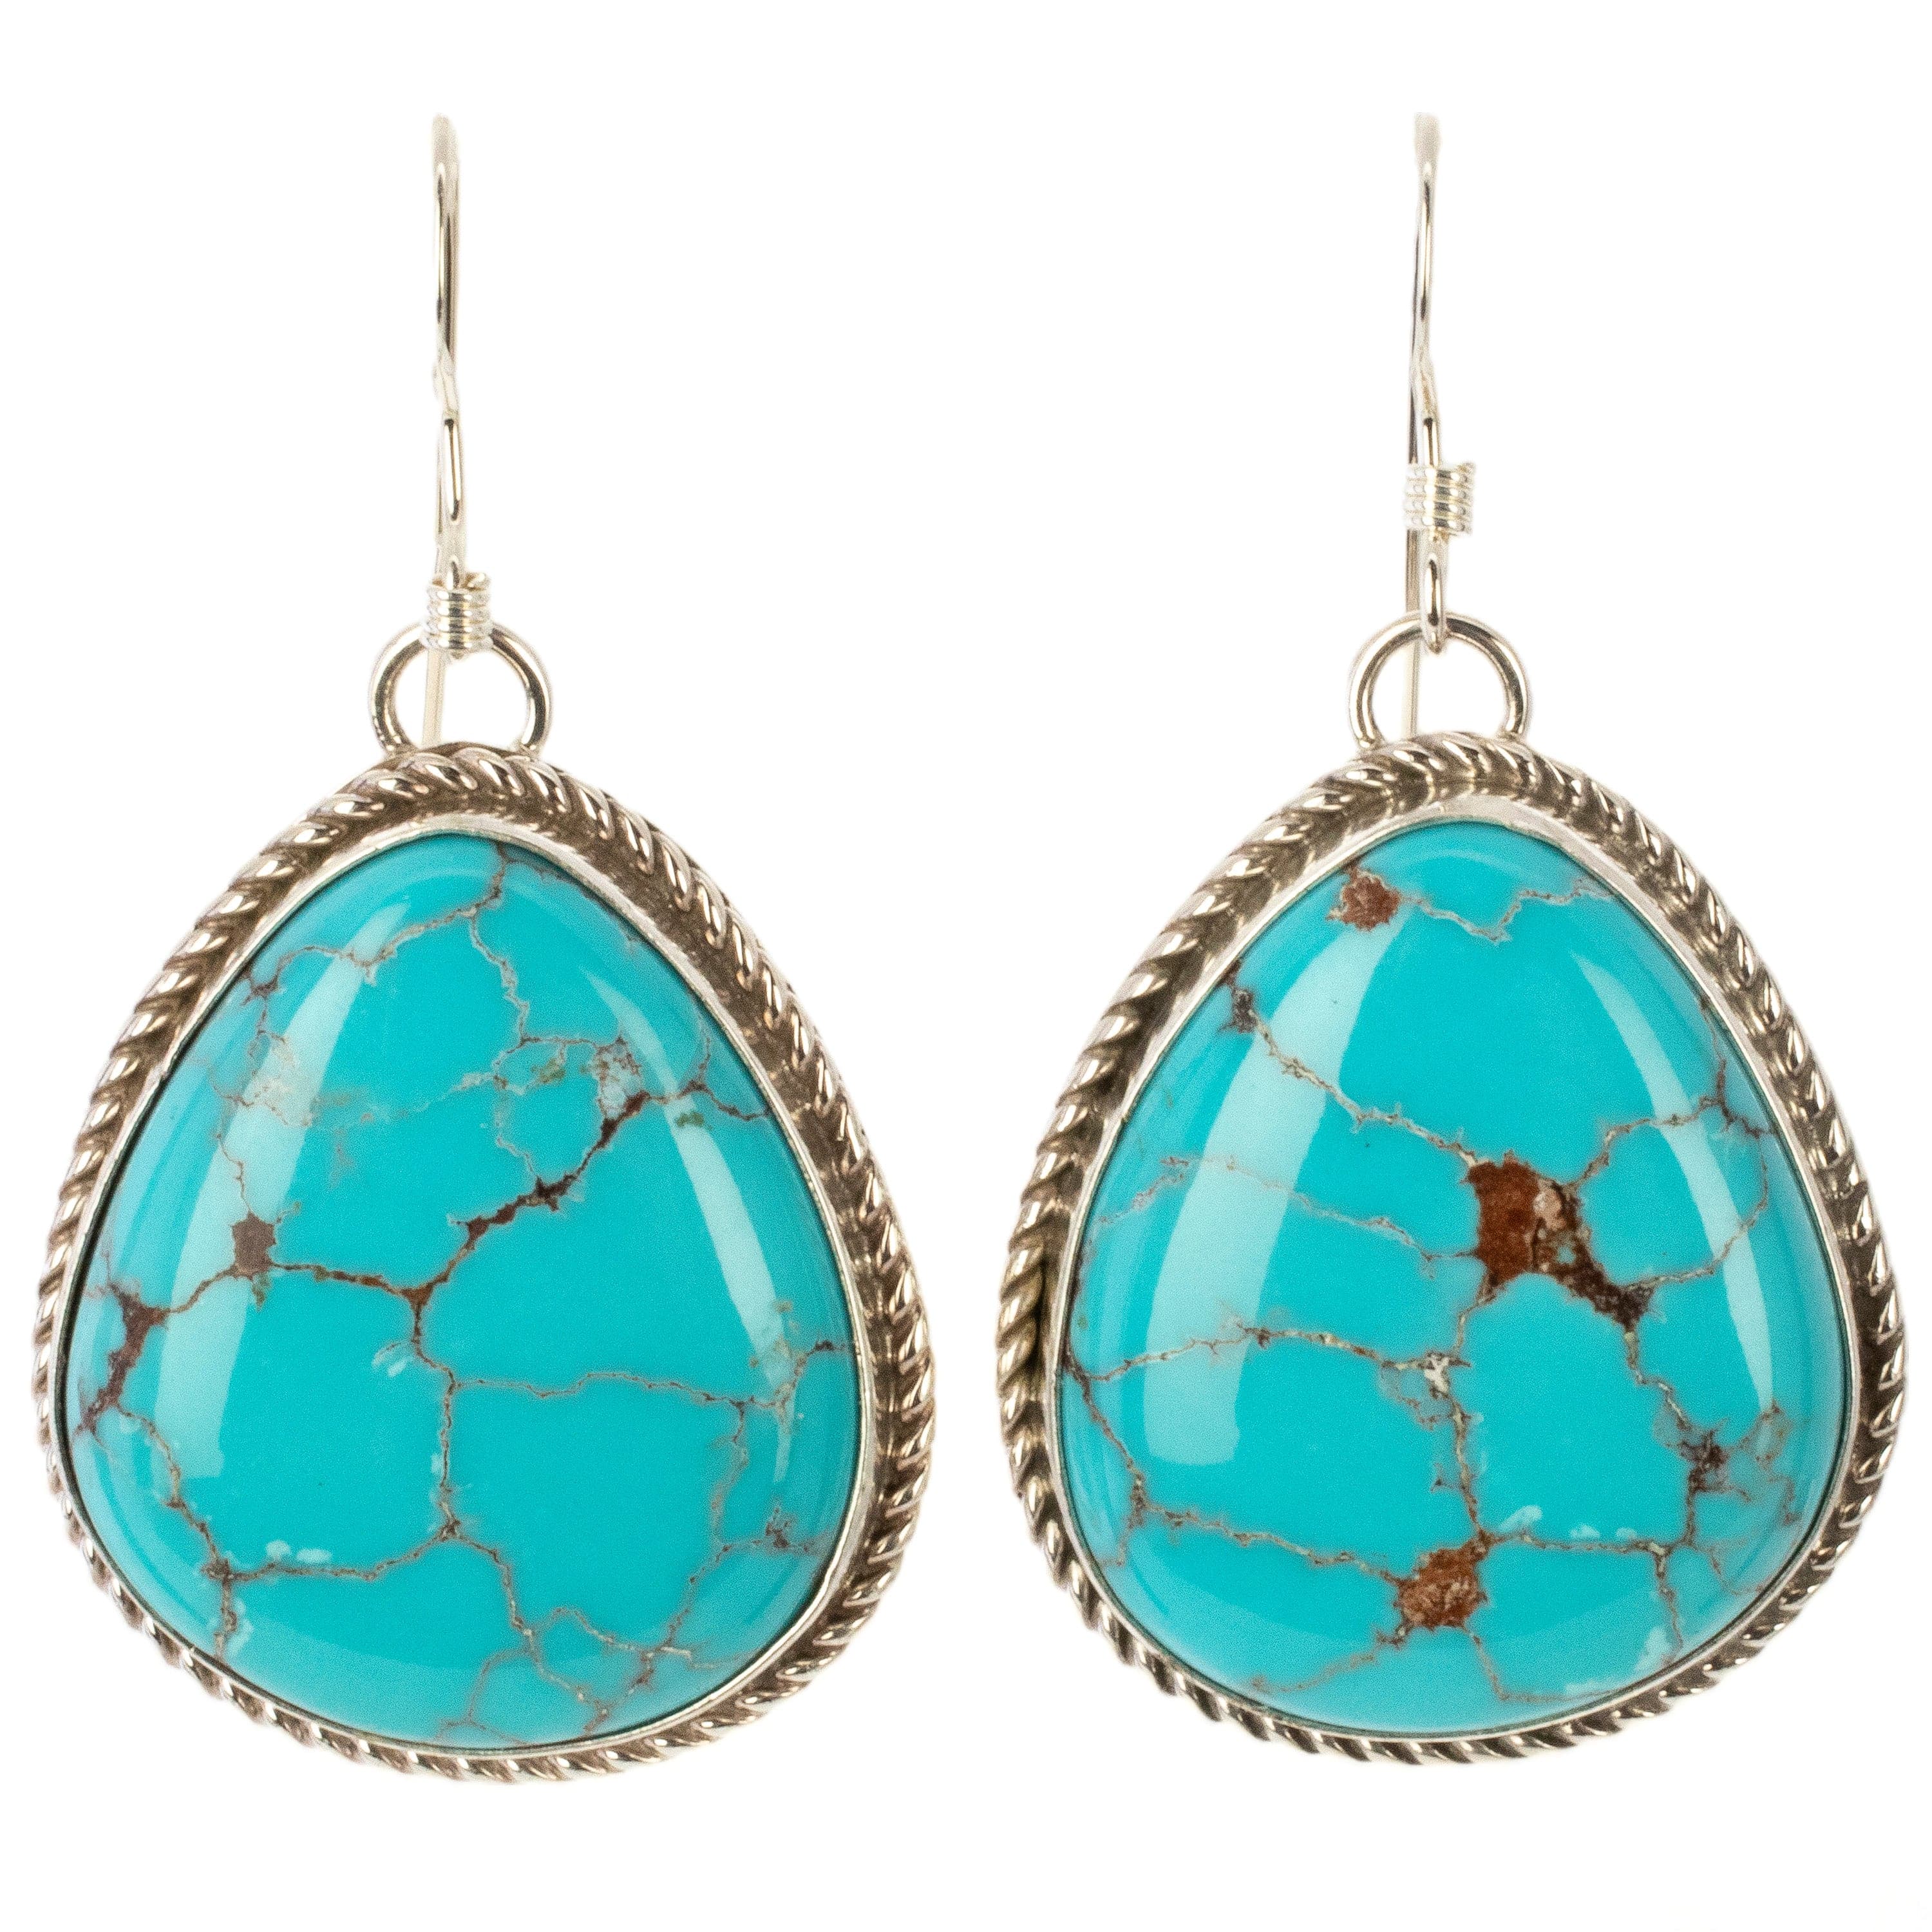 Kalifano Native American Jewelry Kingman Turquoise USA Native American Made 925 Sterling Silver Dangly Earrings with French Hook NAE600.014